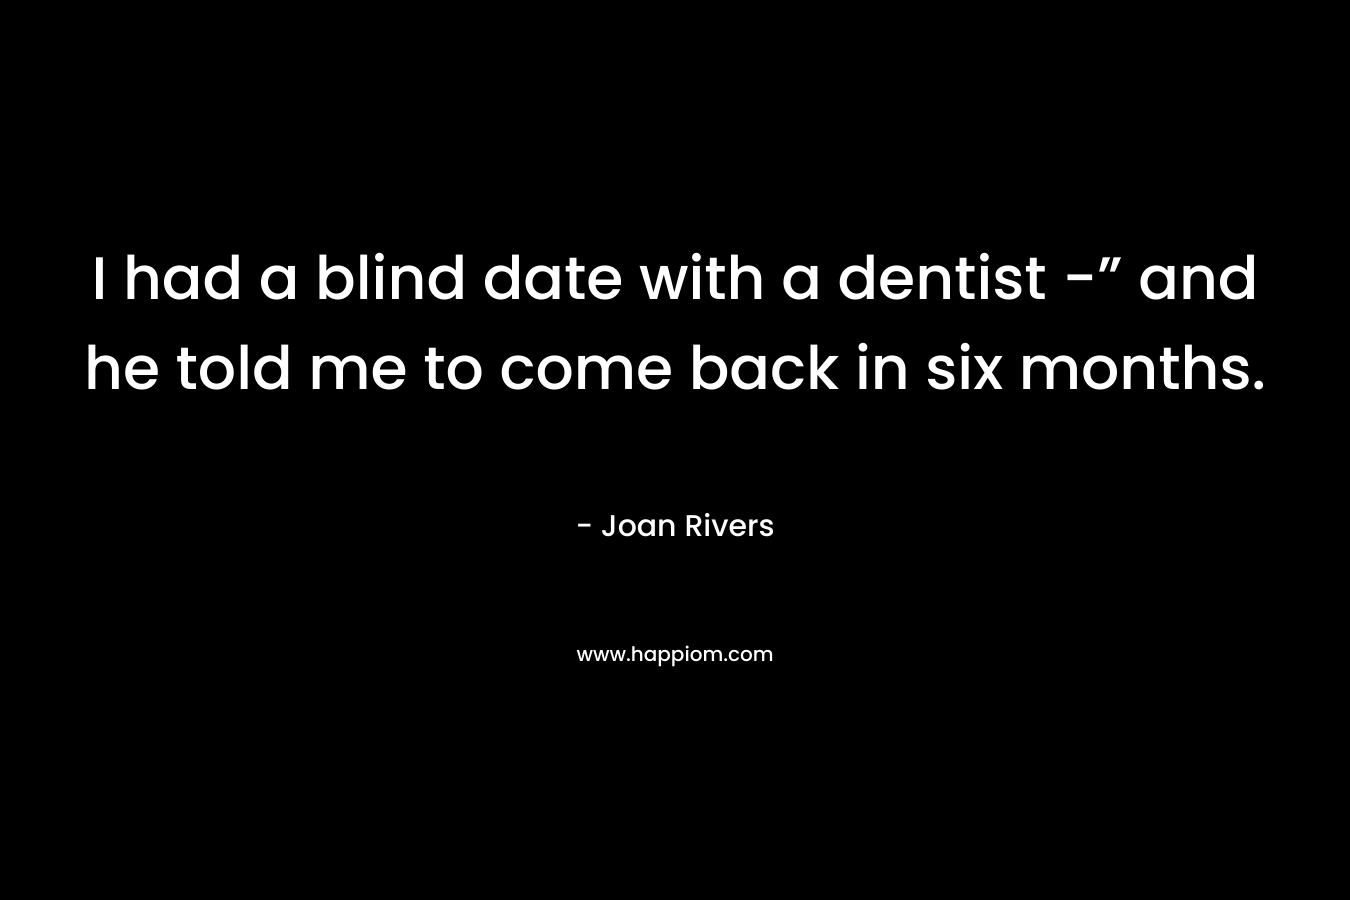 I had a blind date with a dentist -” and he told me to come back in six months.